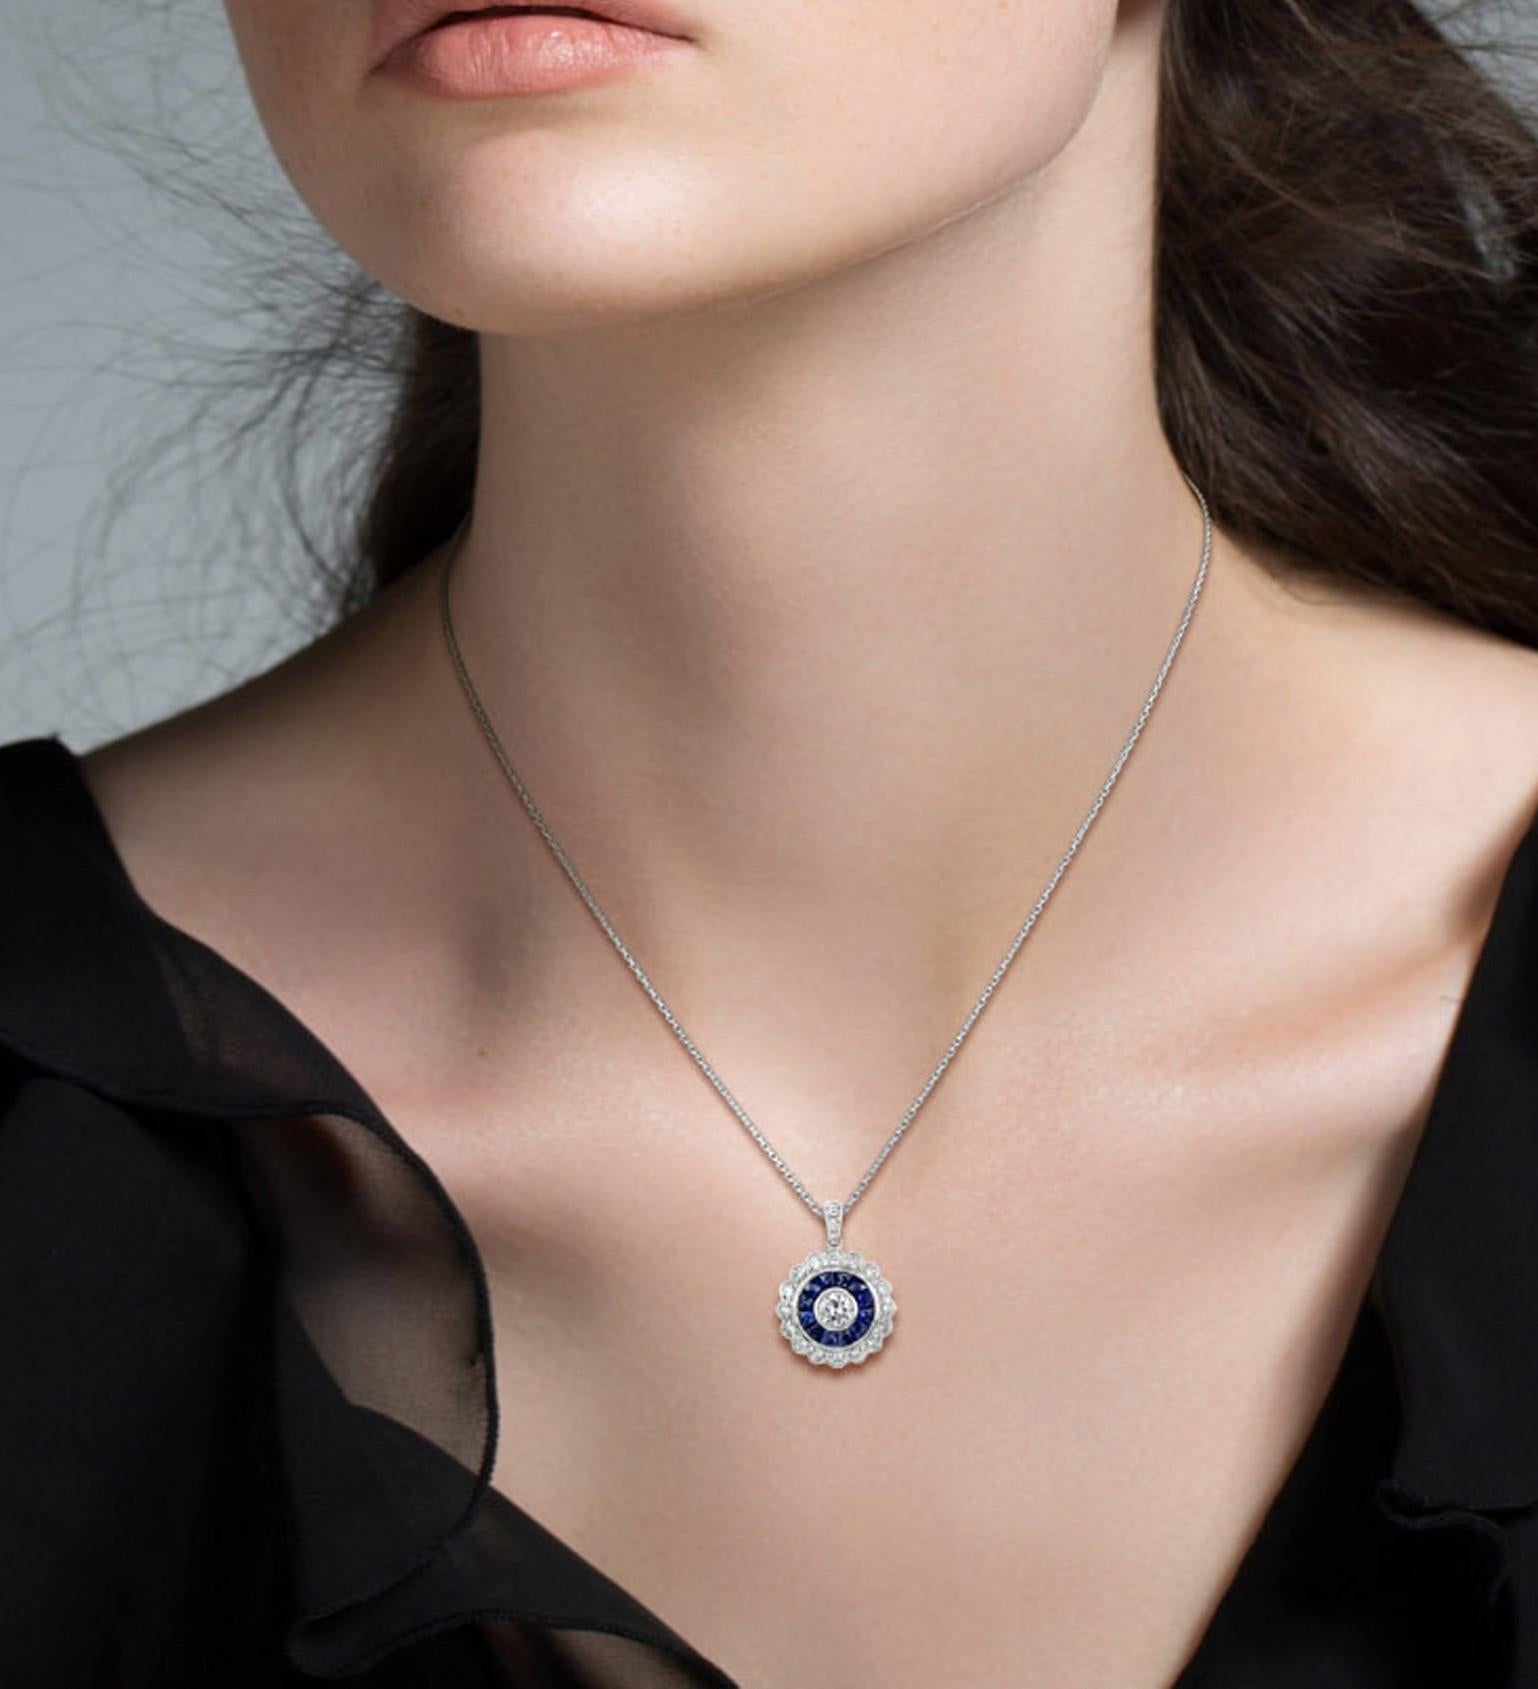 A glamorous pair of Art Deco-inspired target pendant bezel set with a round brilliant cut diamond in the center. The diamond weighs approx. 0.1 carat and its haloed by French cut sapphires and further diamonds set in 18k white gold with millgrain